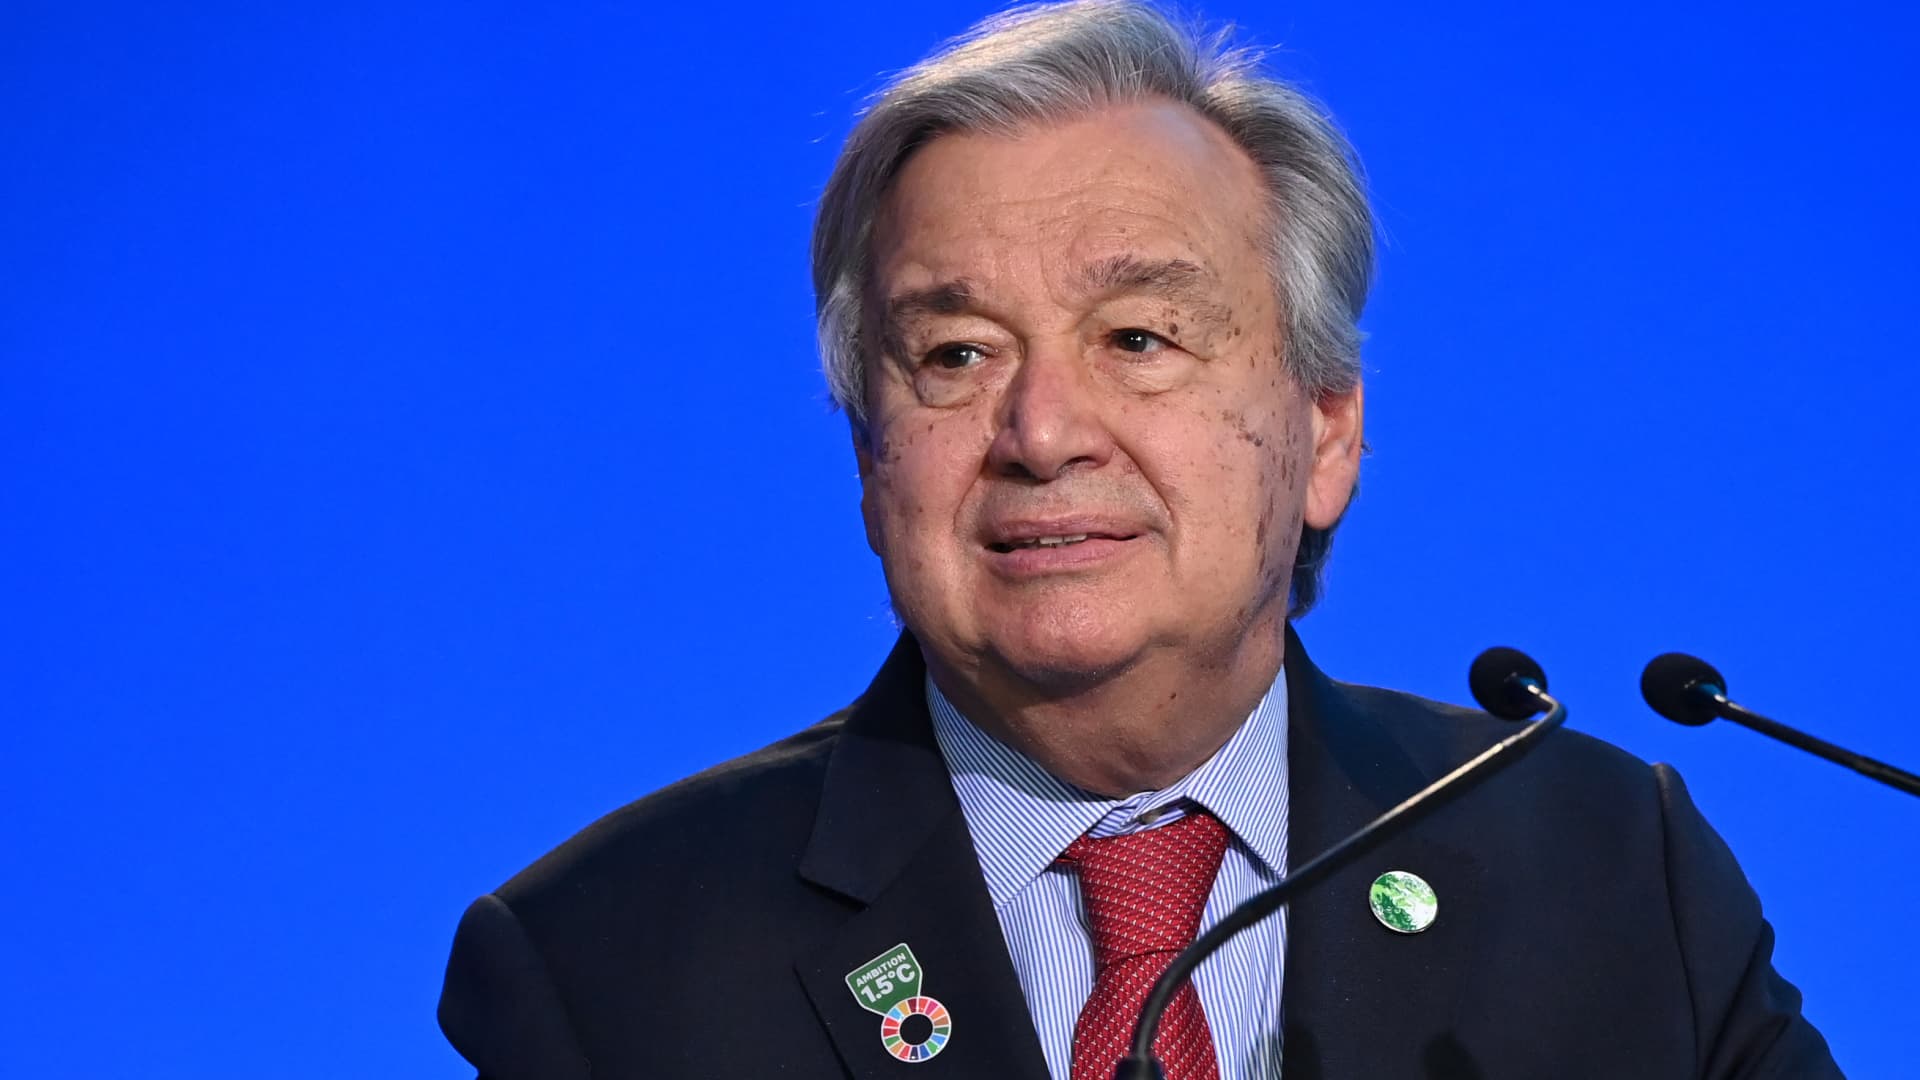 Coal’s a ‘stupid investment’ and we’re ‘sleepwalking to climate catastrophe,’ says UN chief Guterres